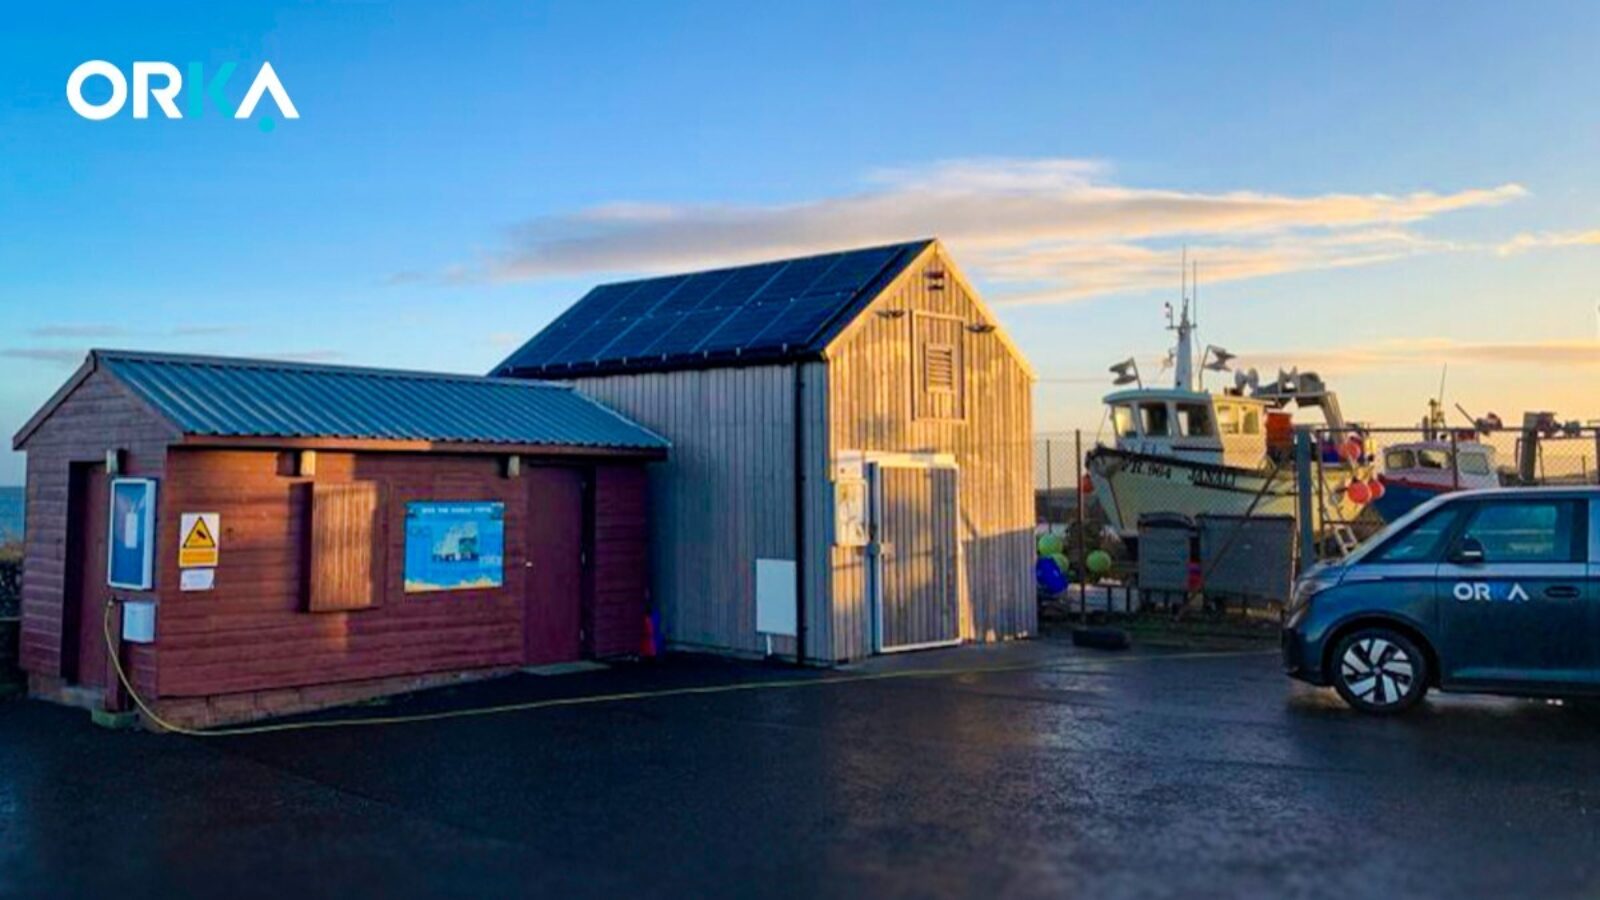 ORKA delivers a chilly solar solution for Rosehearty Harbour and Inshore Fishermen's Association